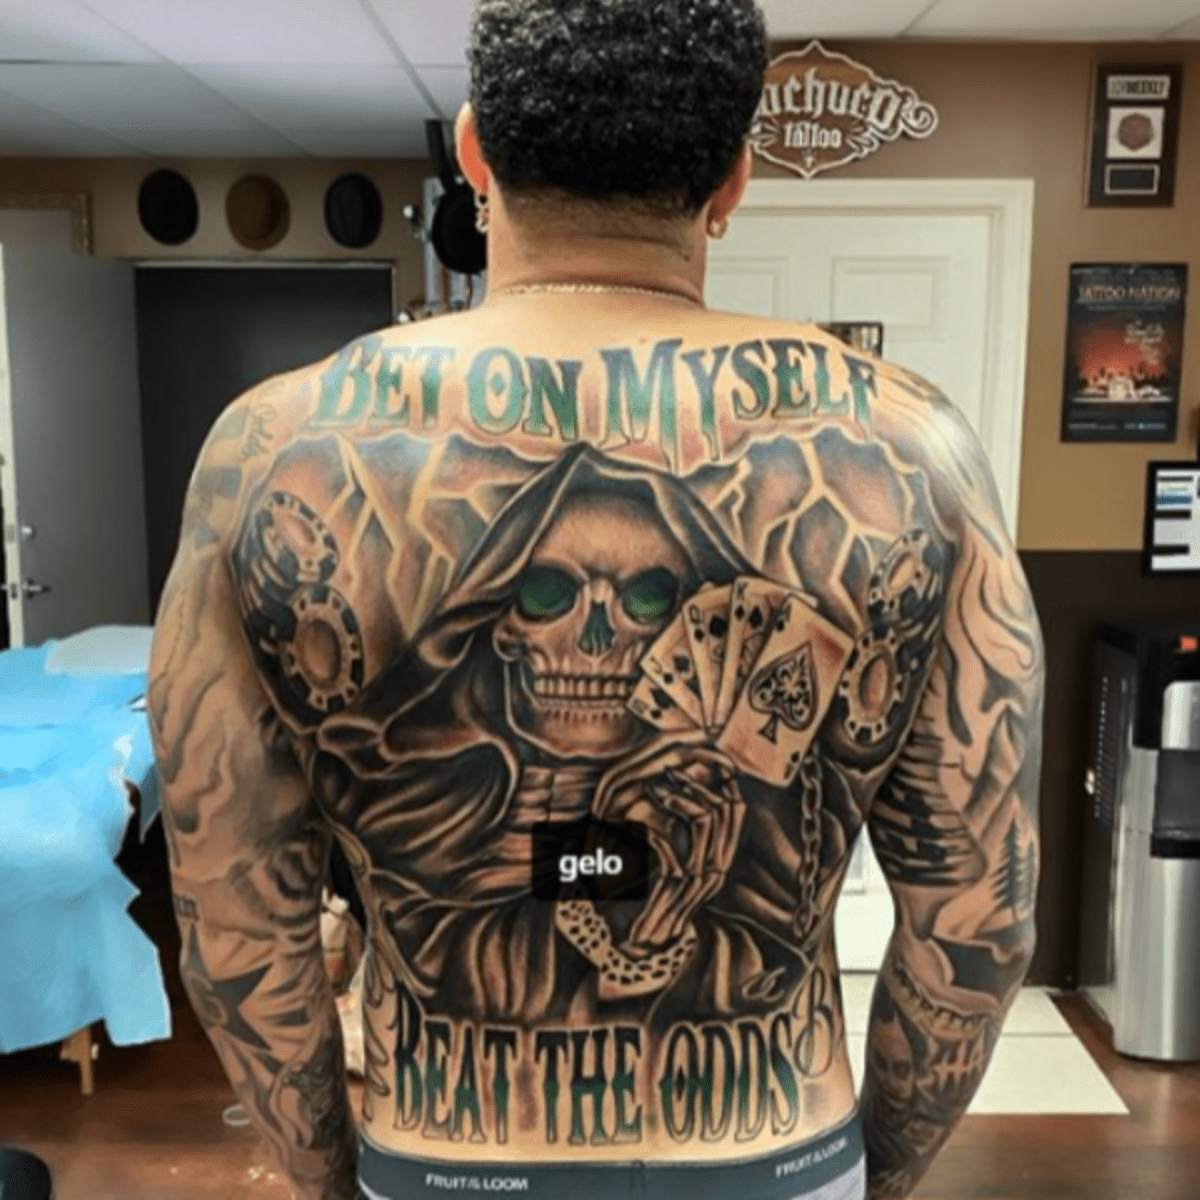 3 Men Shared the Epic Tattoos They Got to Cover Their Scars